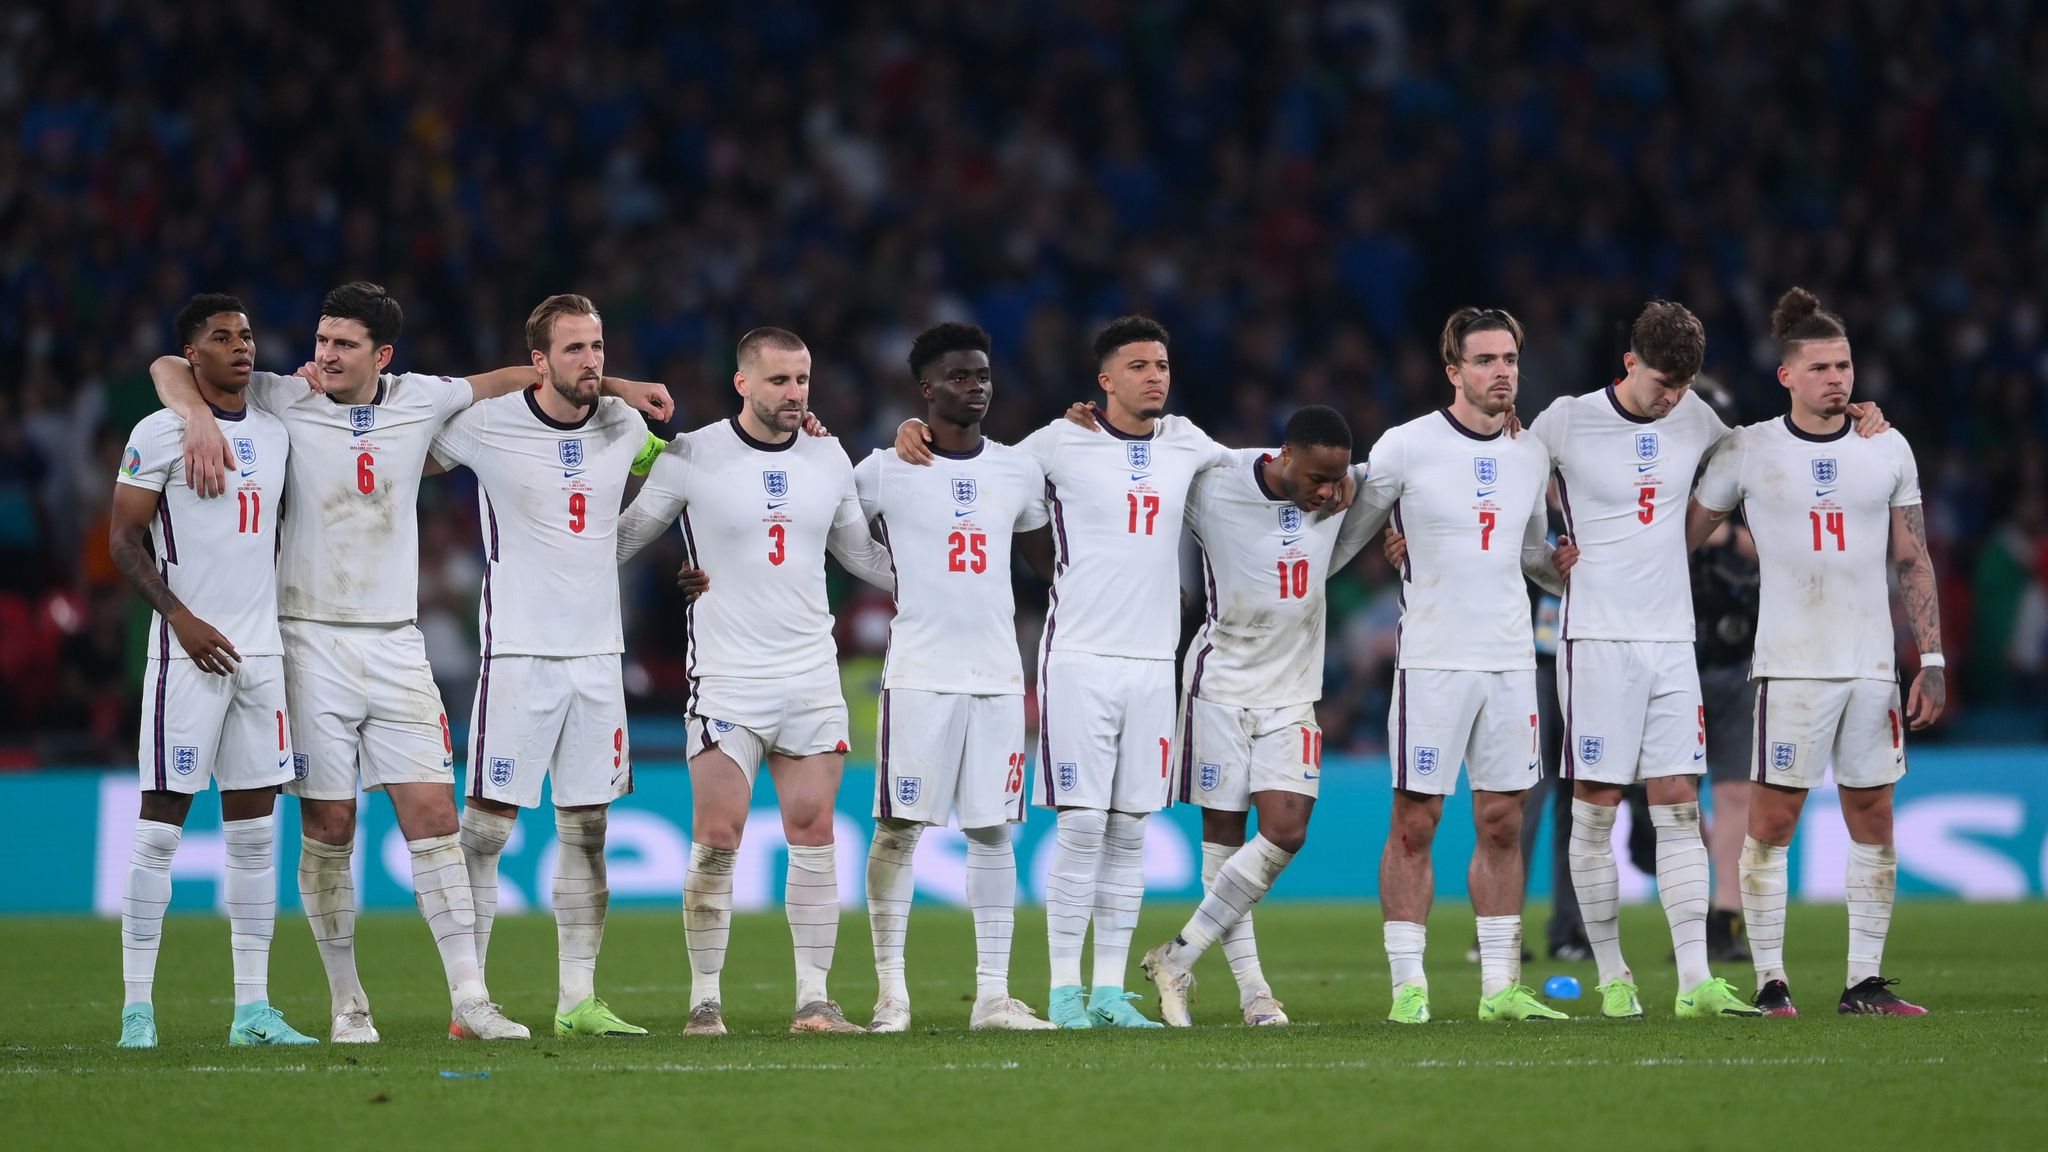 England's Euro 2020 adventure in picture